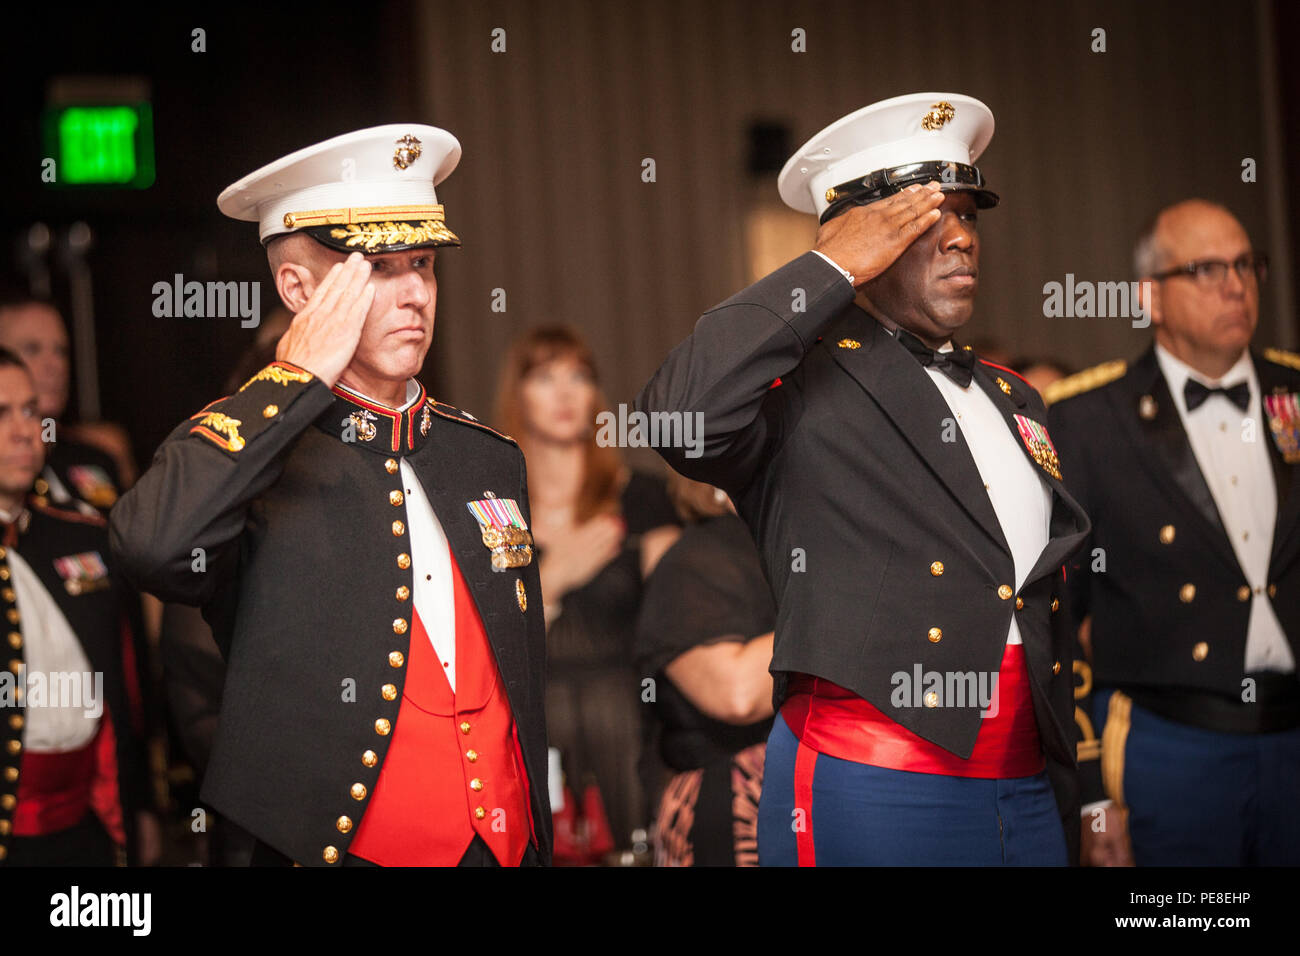 The 18th Sergeant Major of the Marine Corps, Ronald L. Green, joins U.S. Marine Corps Forces South as they celebrate their birthday ball in Miami, Oct. 24, 2015. Sgt. Maj. Green was the Guest of Honor at the Ball. (U.S. Marine Corps photo by Sgt. Melissa Marnell, Office of the Sergeant Major of the Marine Corps/Released) Stock Photo